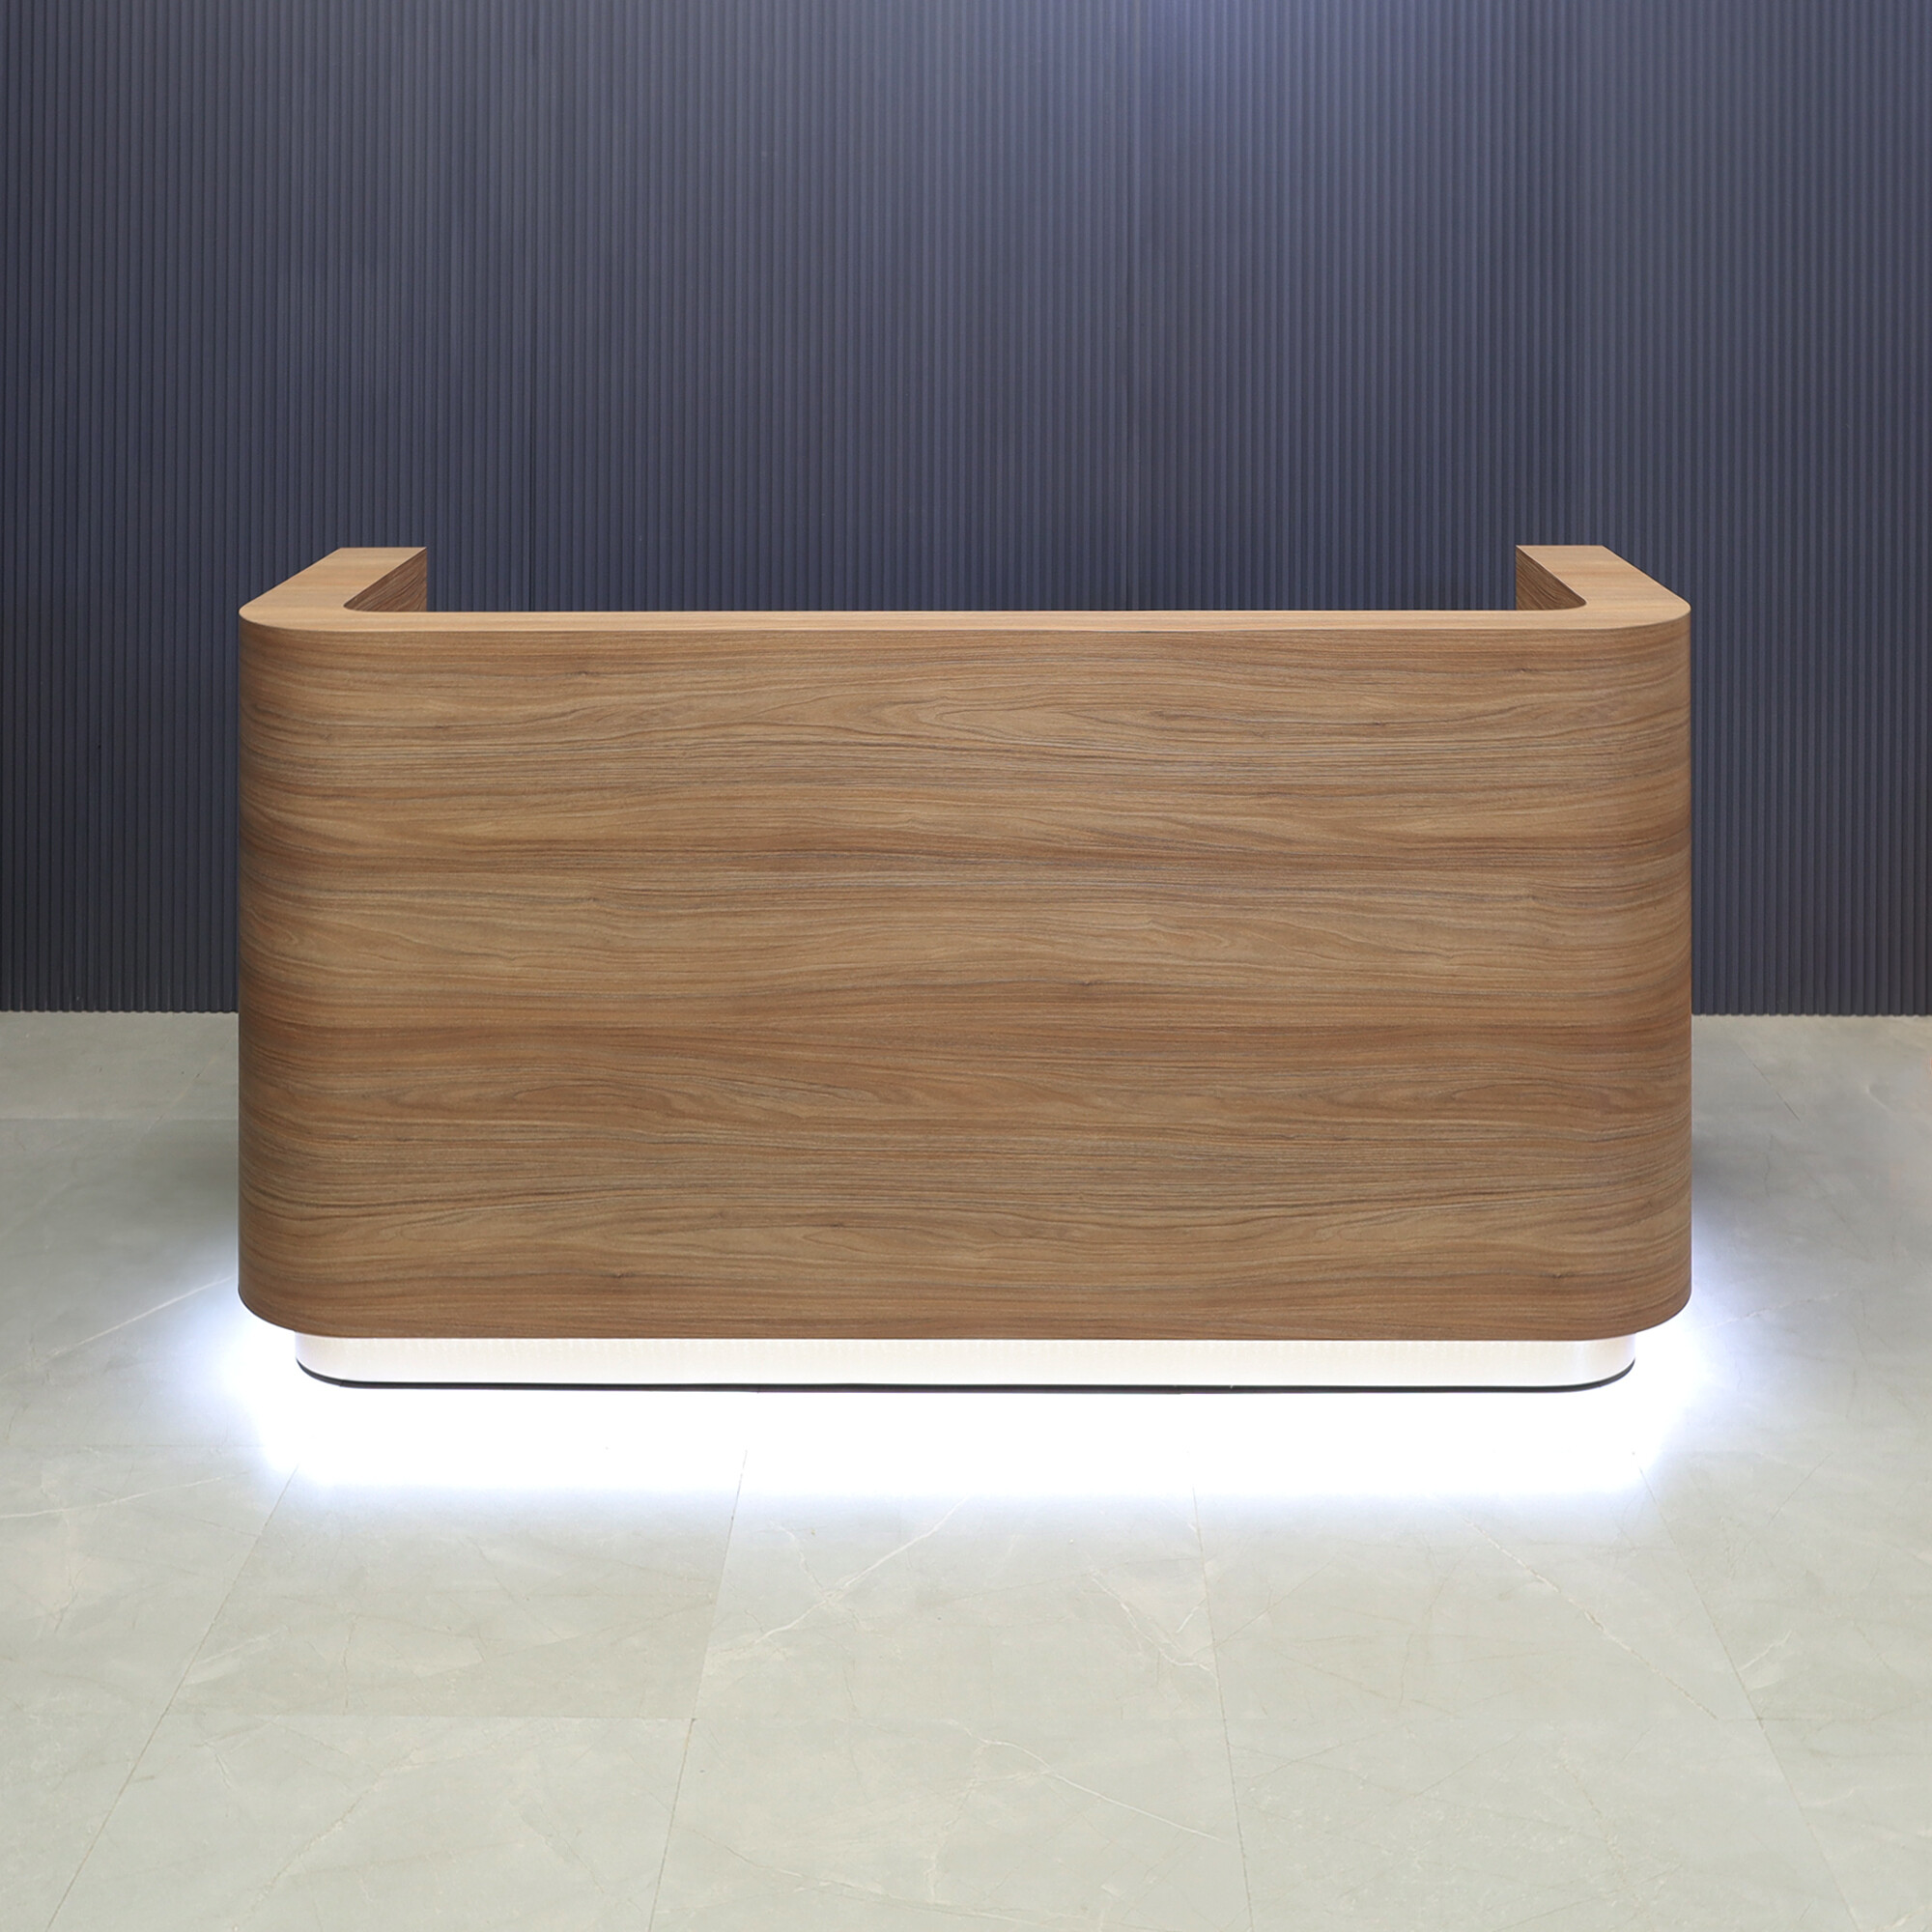 84-inch Nola Custom Reception Desk in uptown walnut matte laminate main desk and brushed gold toe-kick, with white LED, shown here.